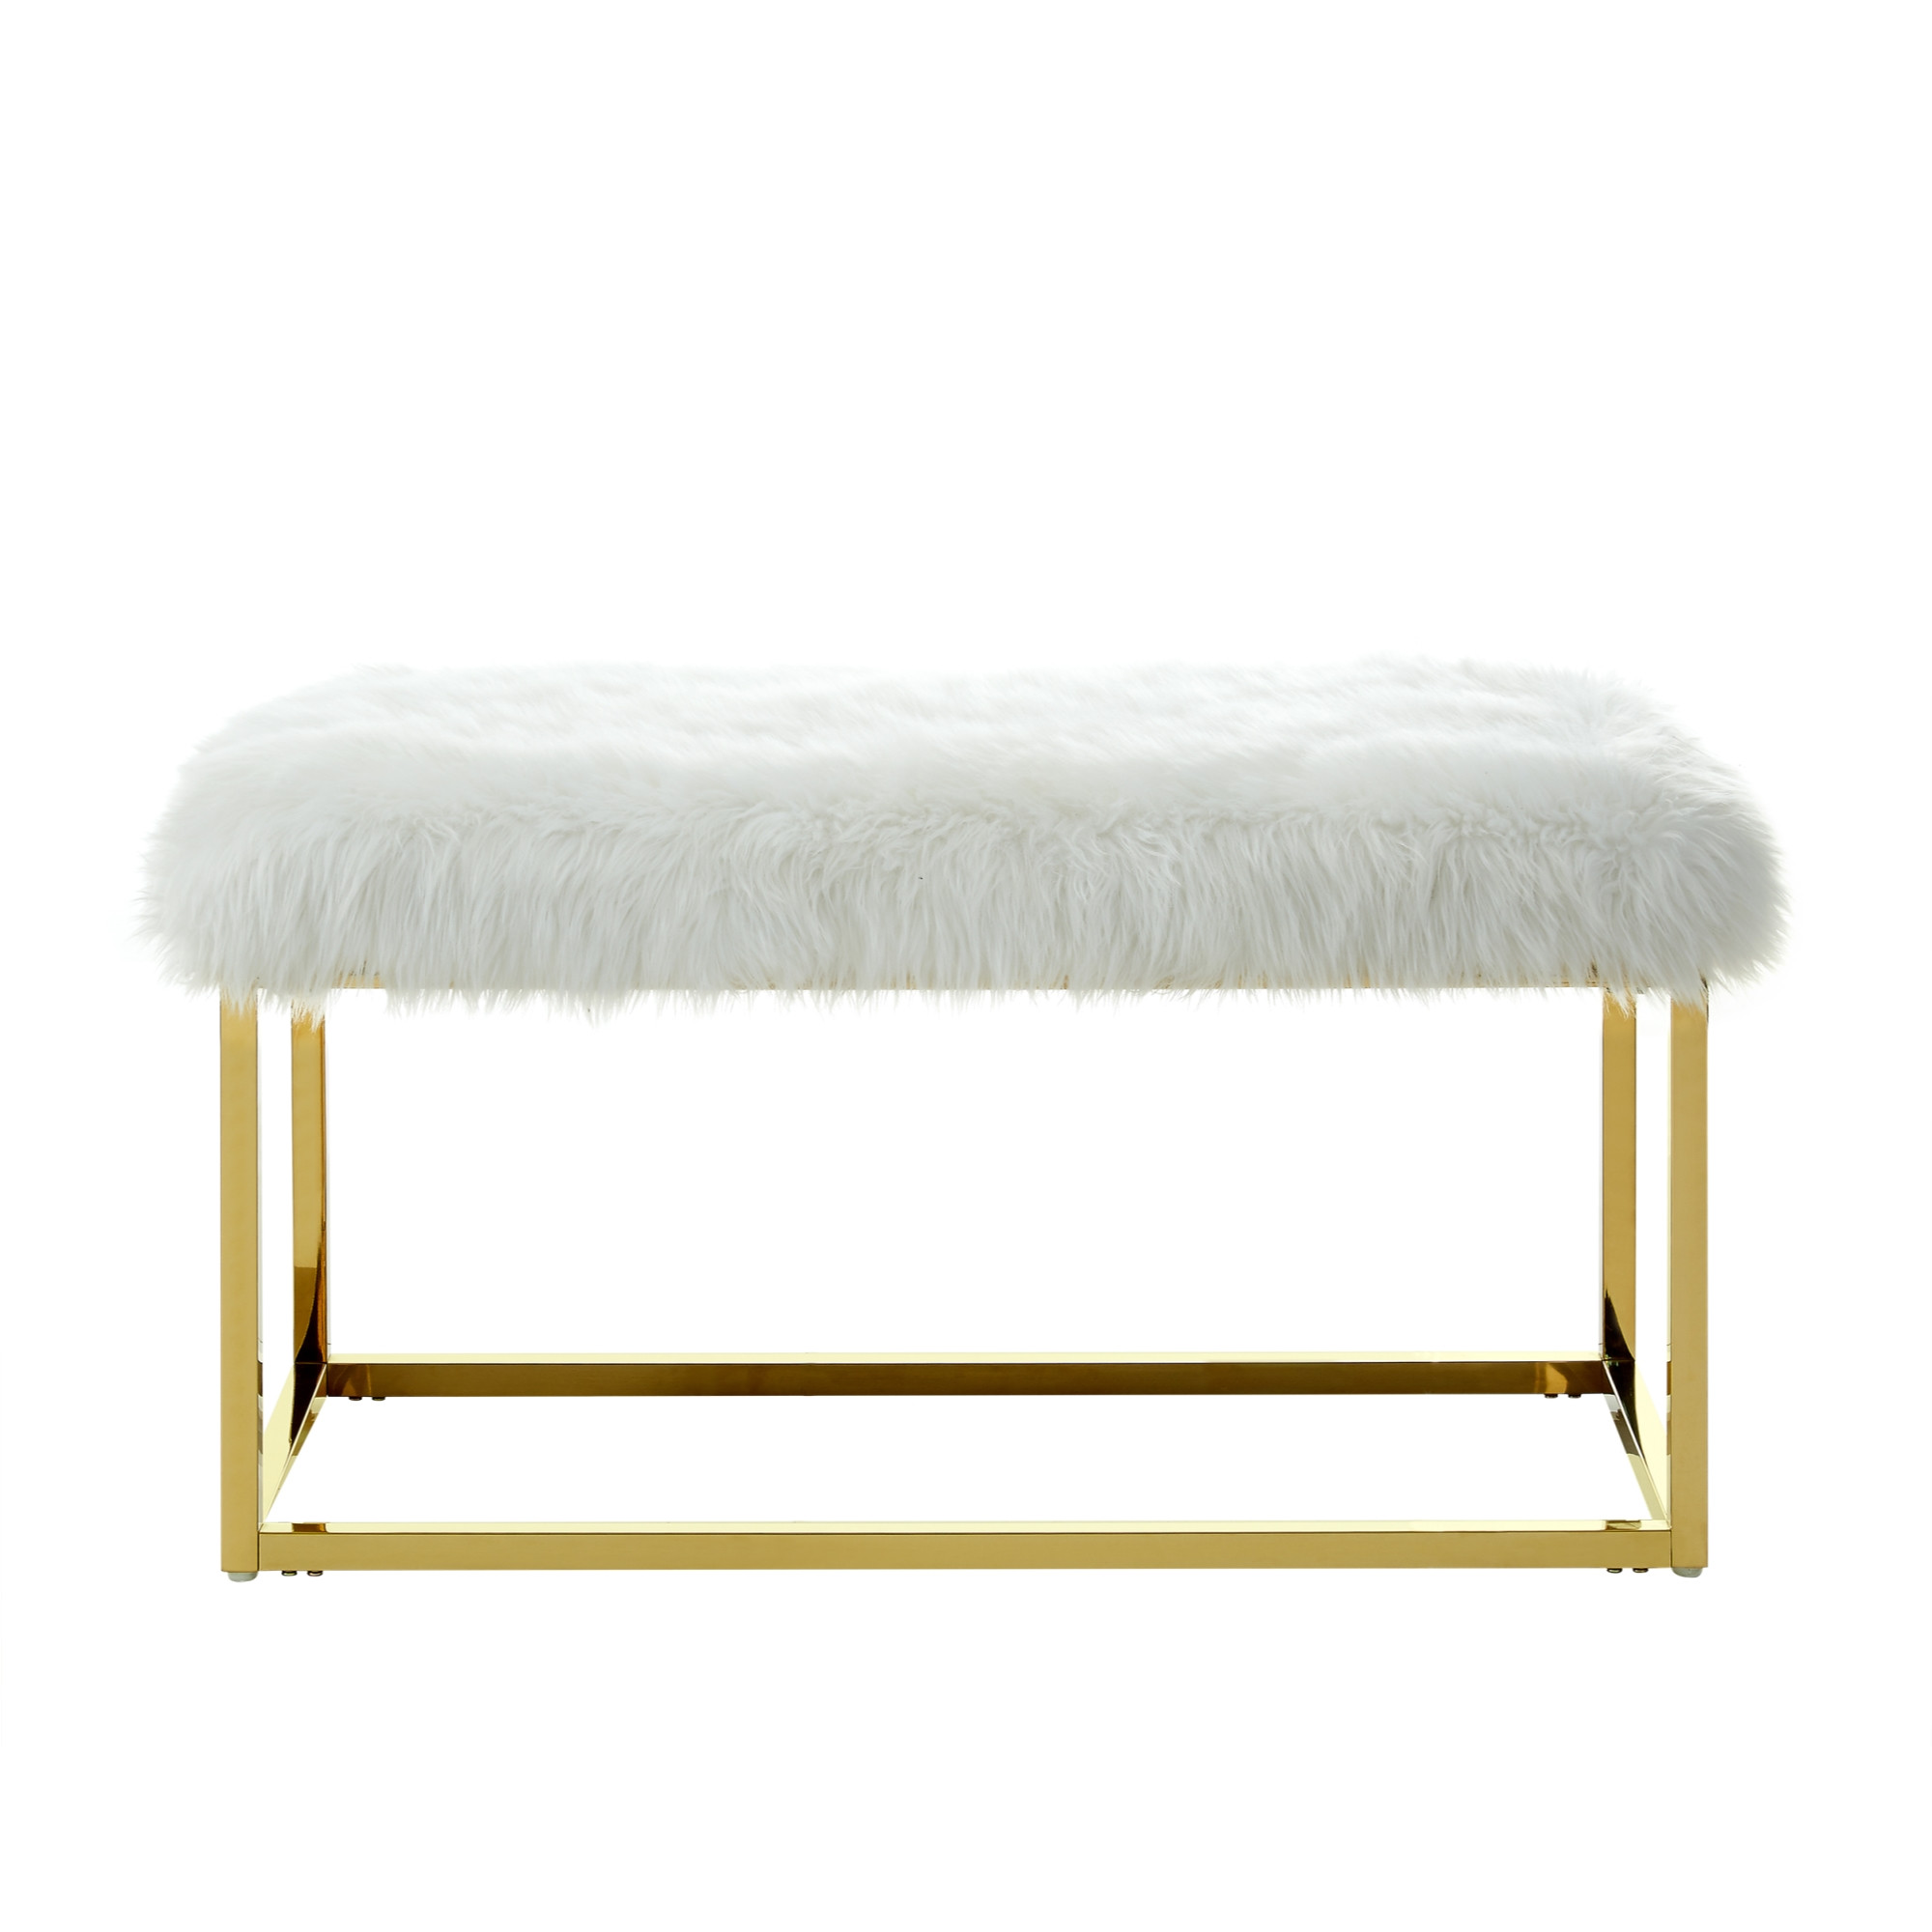 40" White And Gold Upholstered Faux Fur Bench-490849-1